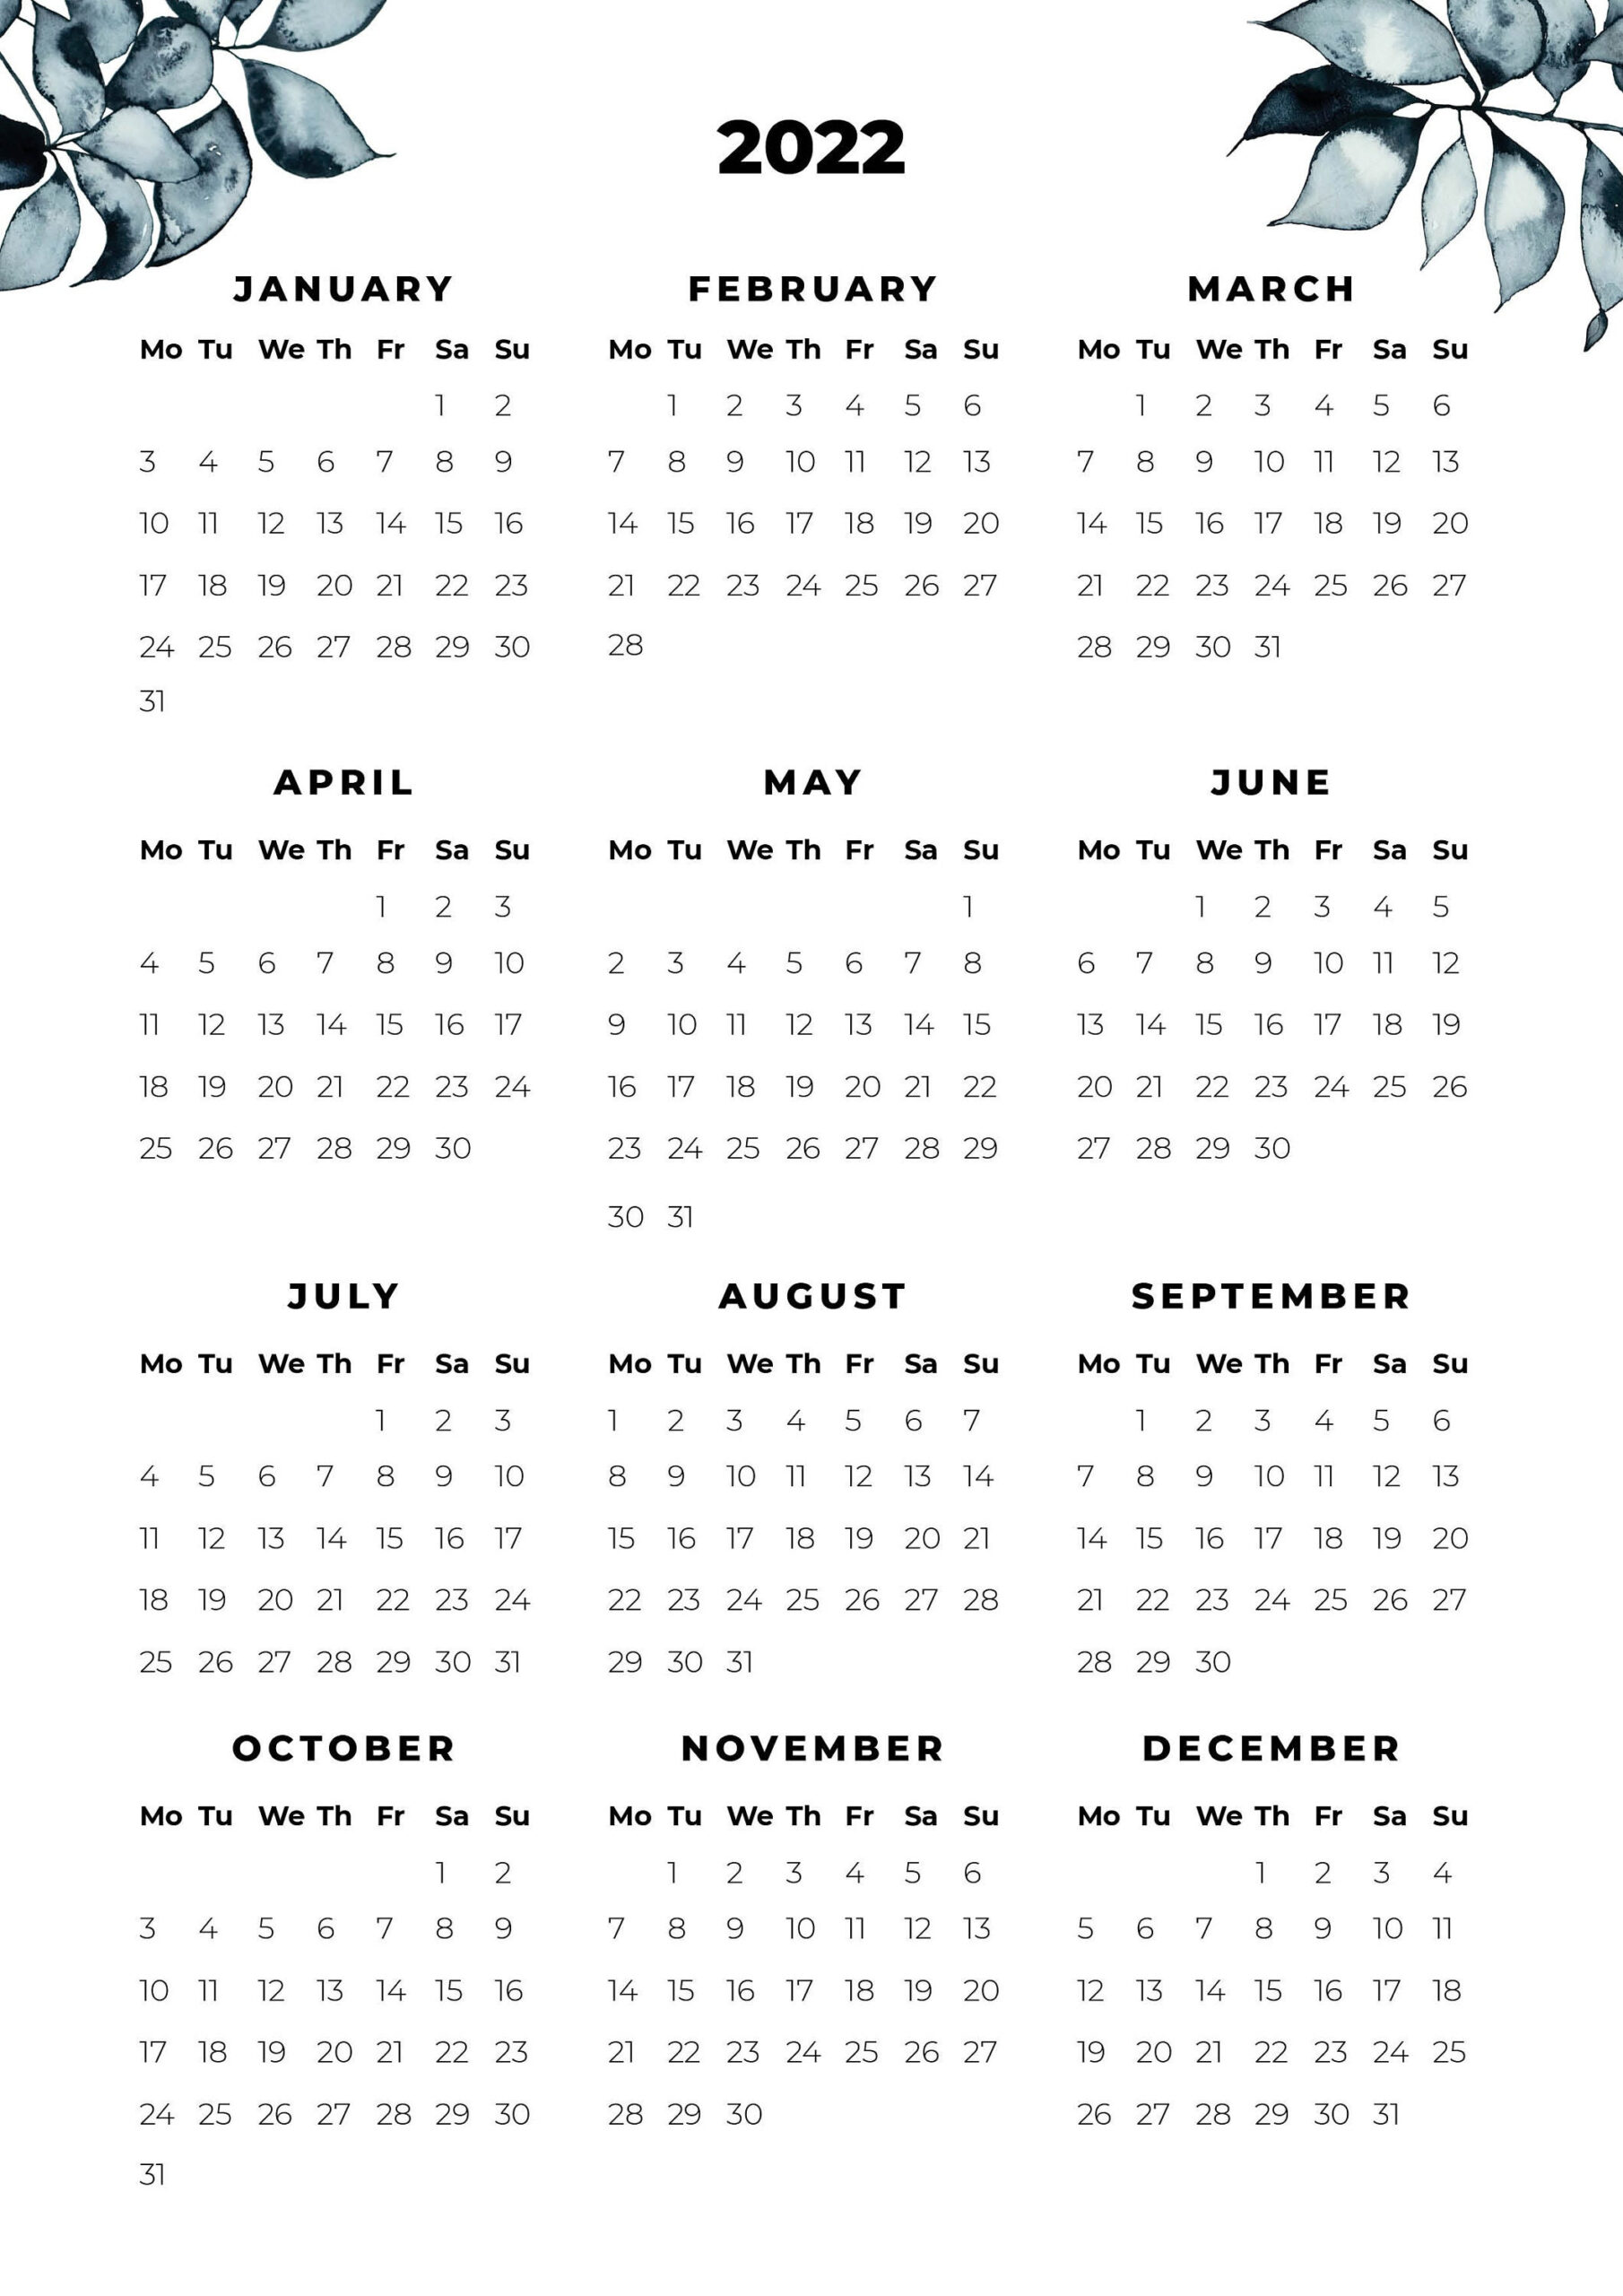 2022 Year At A Glance Calendar Printable One Page 12 Month | Etsy-2022 Calendar At A Glance Printable